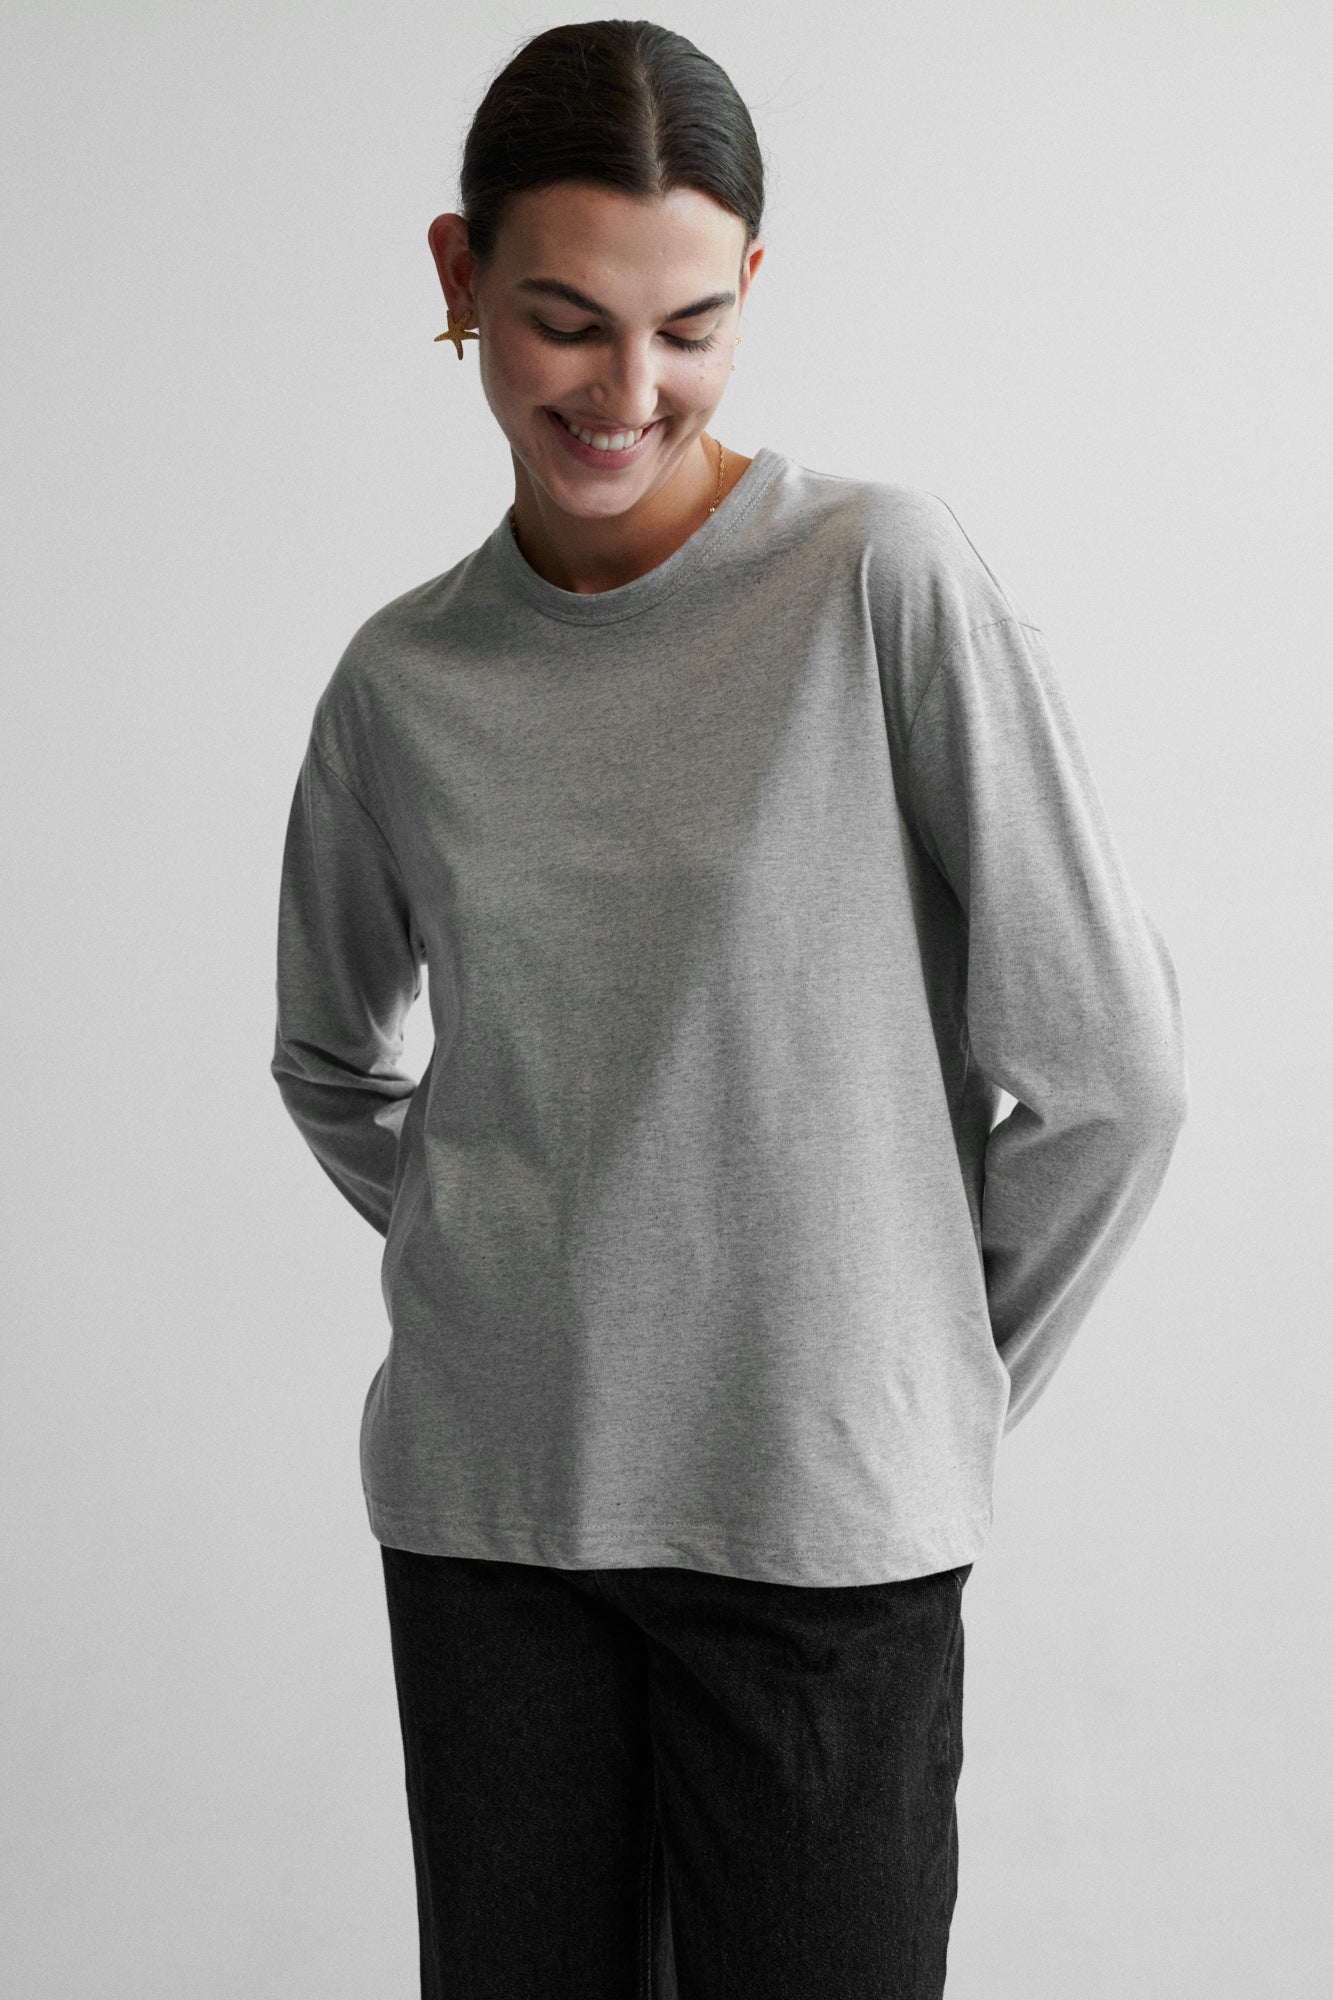 Longsleeve in cotton / 14 / 20 / mist grey ?The model is 178 cm tall and wears size XS/S?